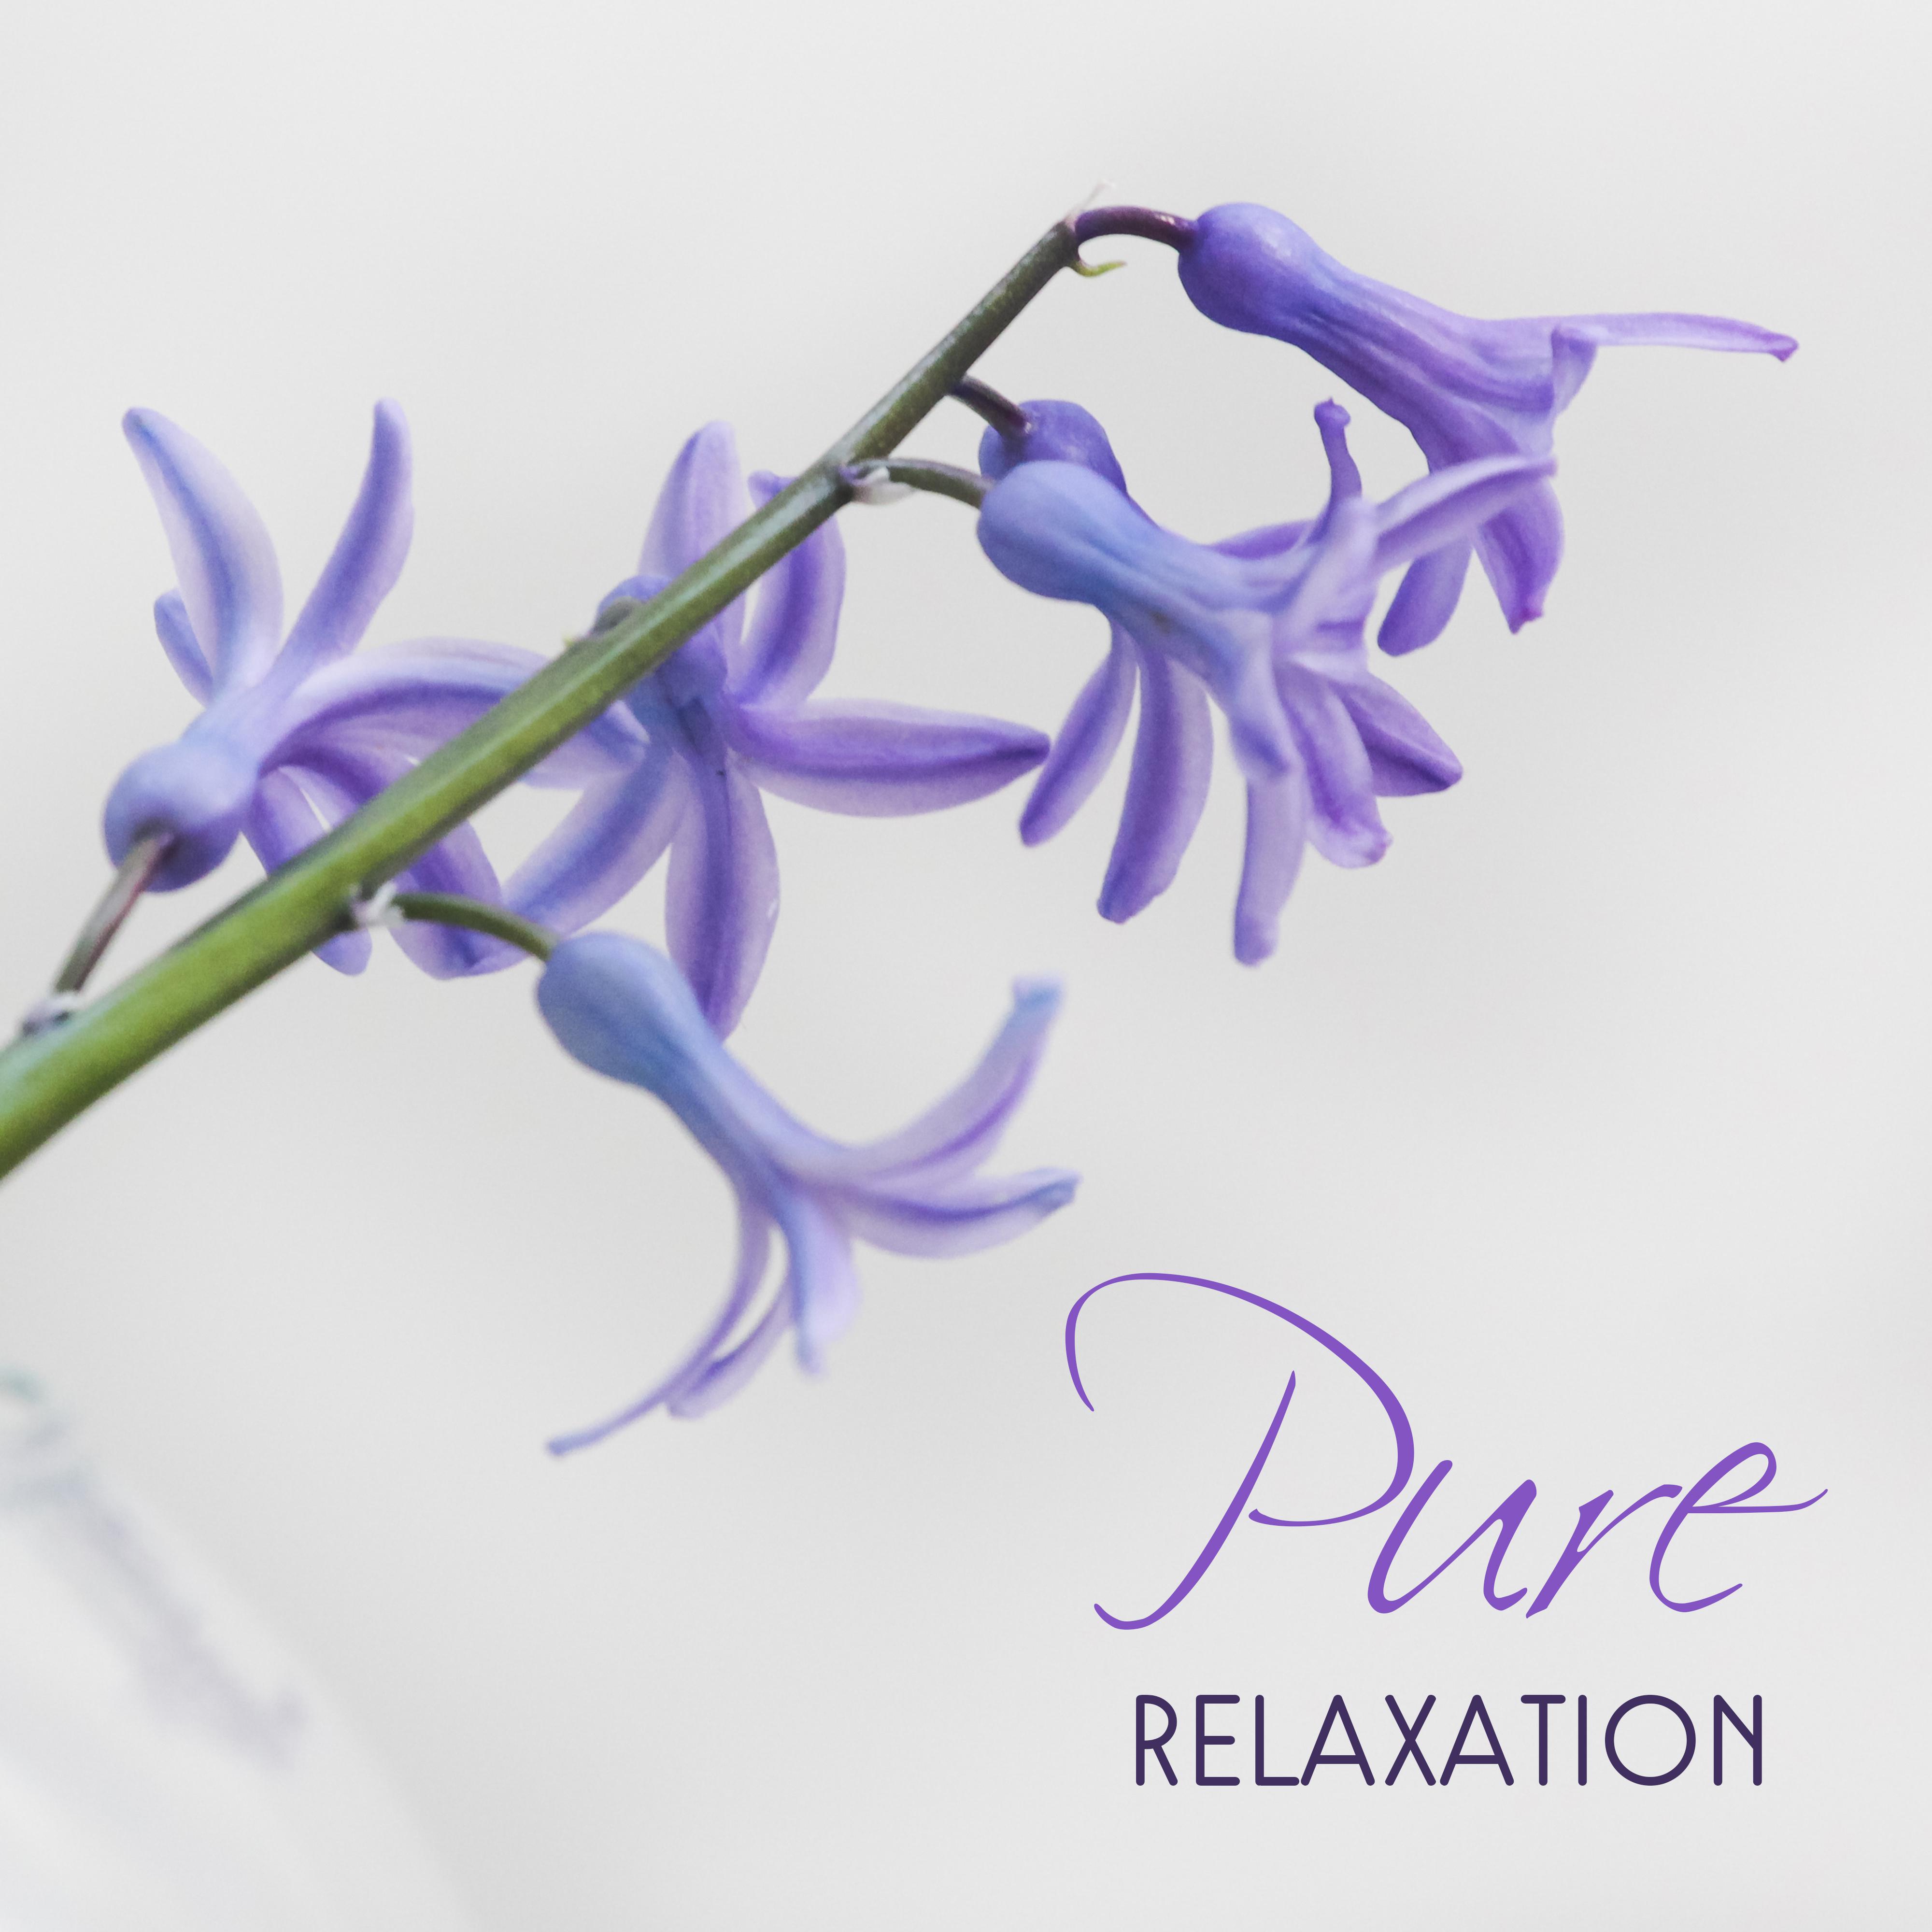 Pure Relaxation  Spa Music, Stress Relief, Soft Nature Sounds for Wellness, Massage, Healing, Zen Music, Peaceful Mind, Spa Dreams, Soothing Piano, Flute